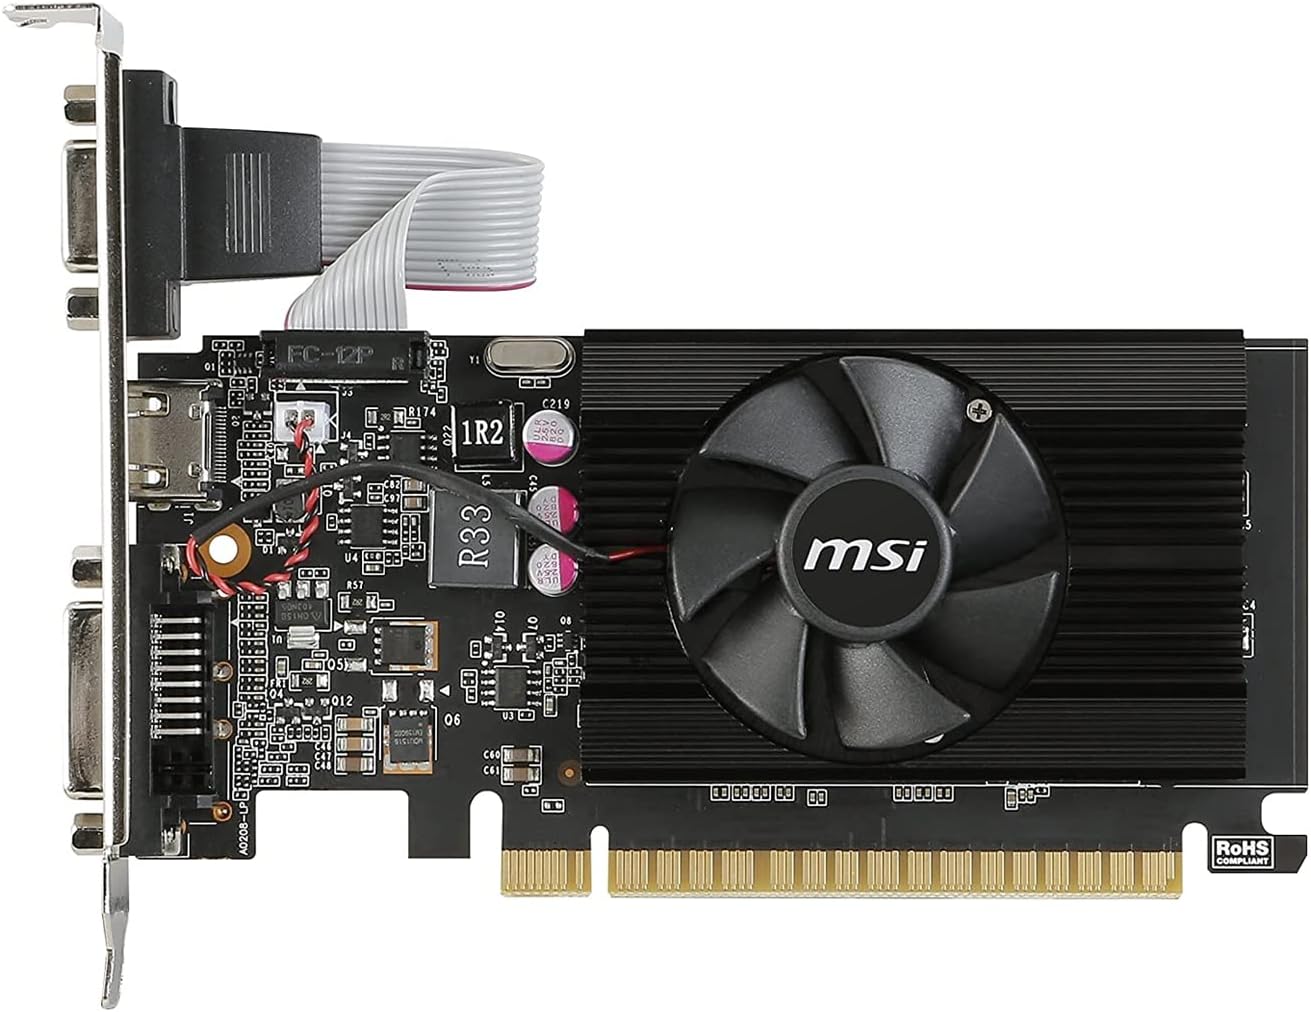 MSI Gaming GeForce GT 710 2GB GDRR3 64-bit HDCP Support DirectX 12 OpenGL 4.5 Single Fan Low Profile Graphics Card (GT 710 2GD3 LP)